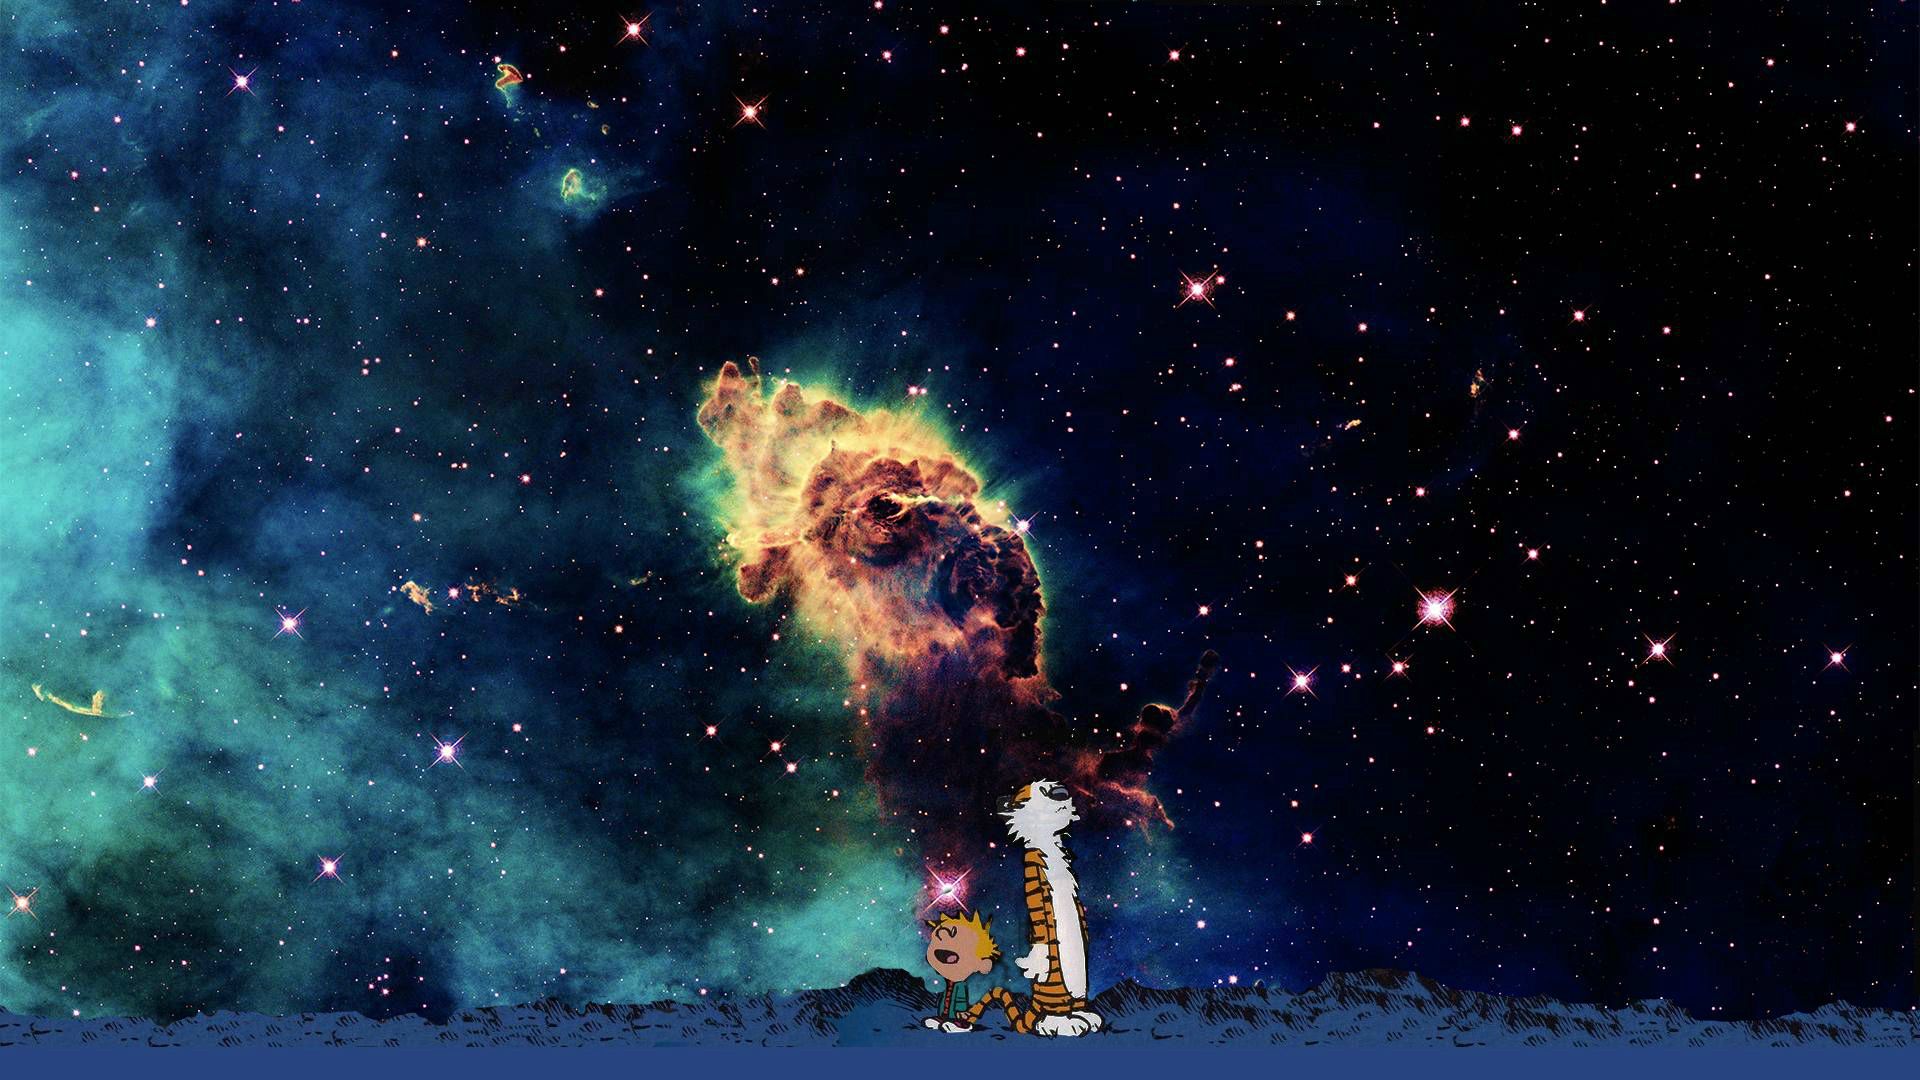 General 1920x1080 Calvin and Hobbes cartoon stars space sky Carina Nebula digital art open mouth looking up standing galaxy